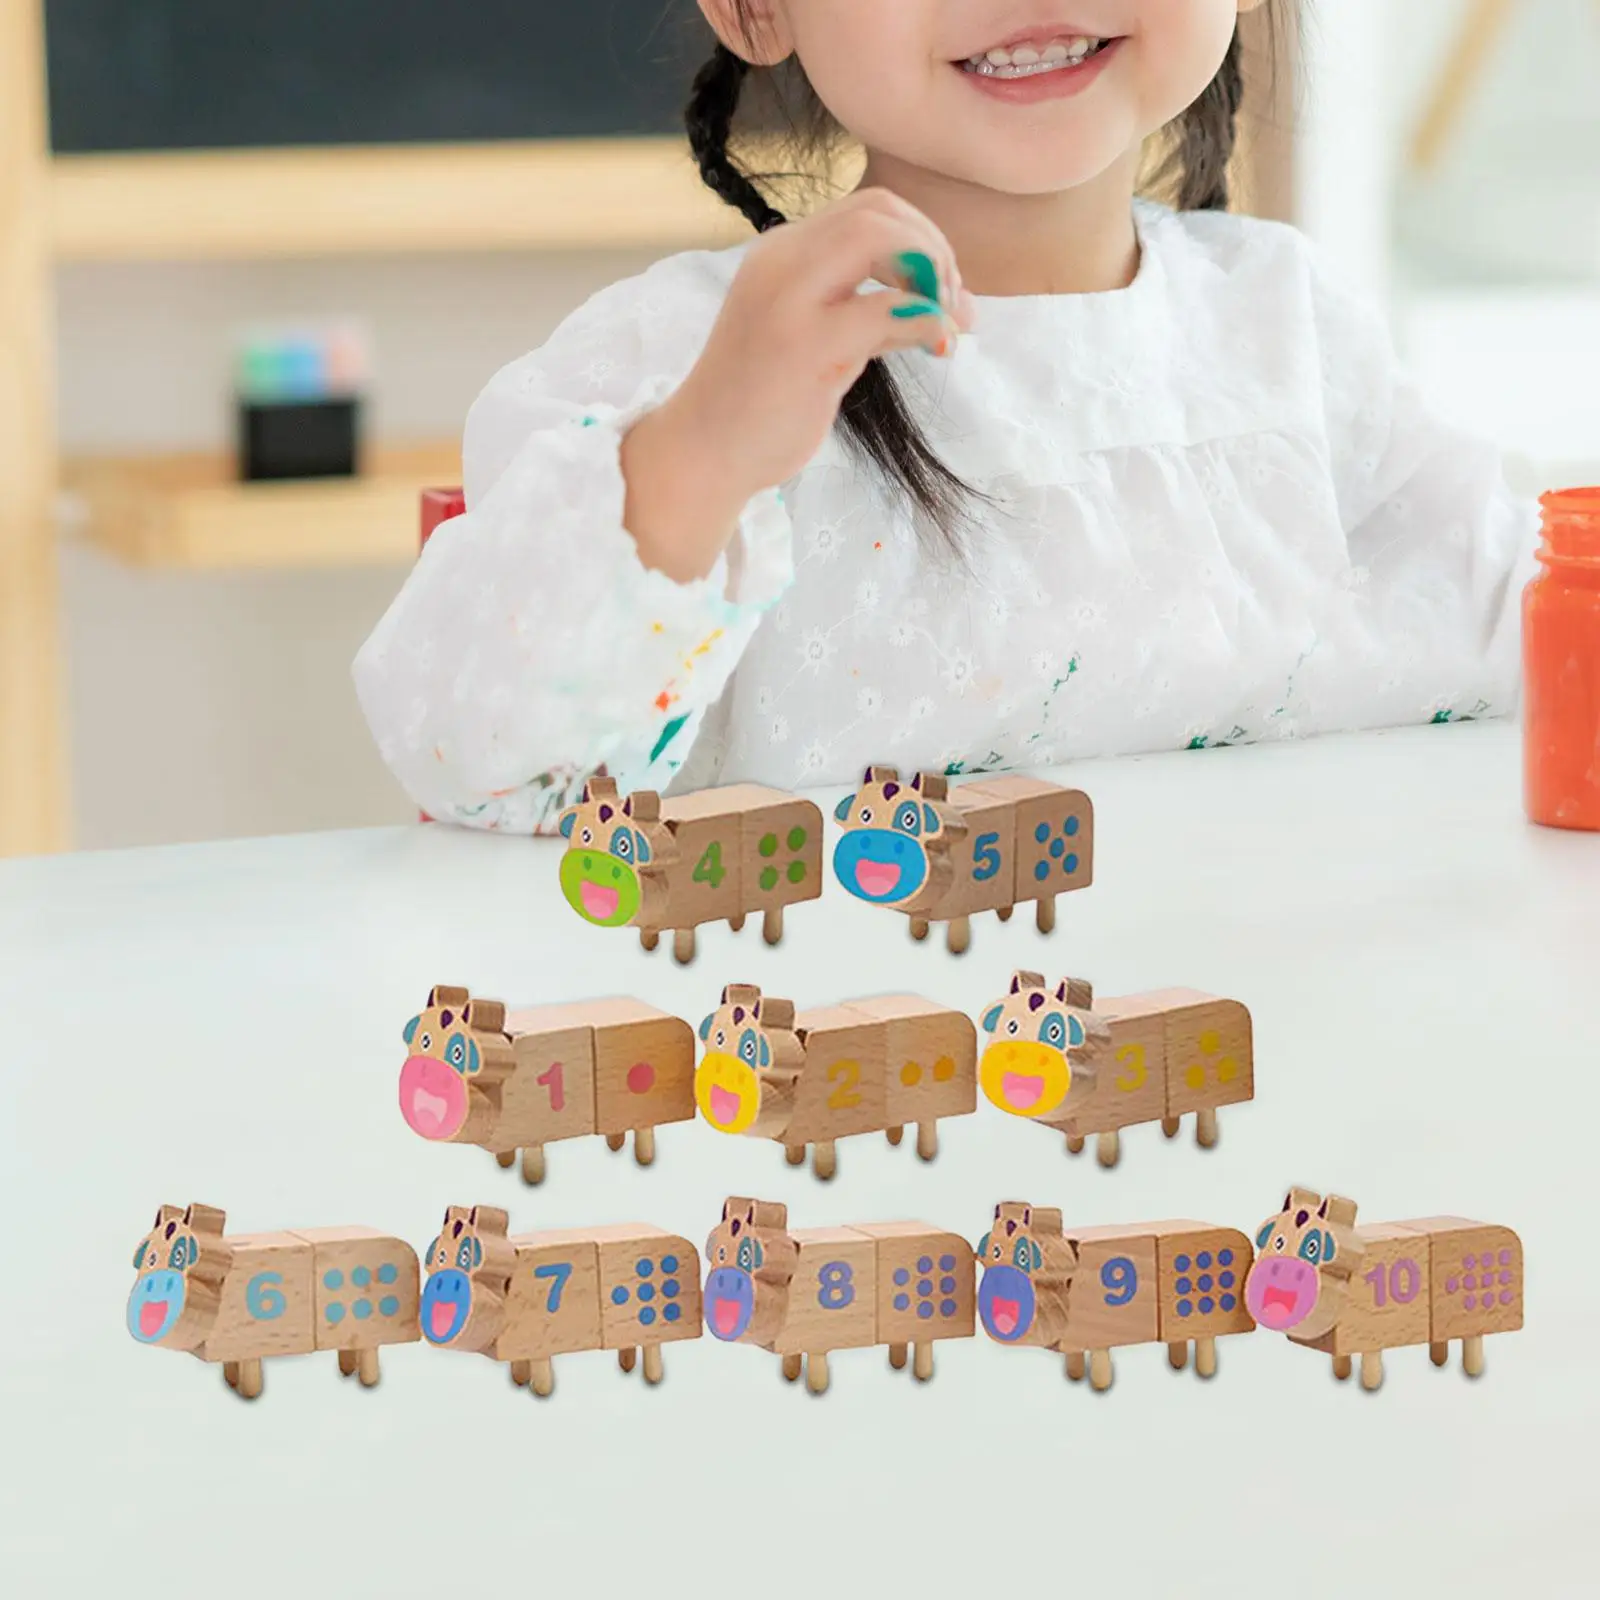 10 Pieces Wooden Building Blocks for Toddlers Preschool Learning Activities Educational Learning Toys for Boys Girls Kids Gifts